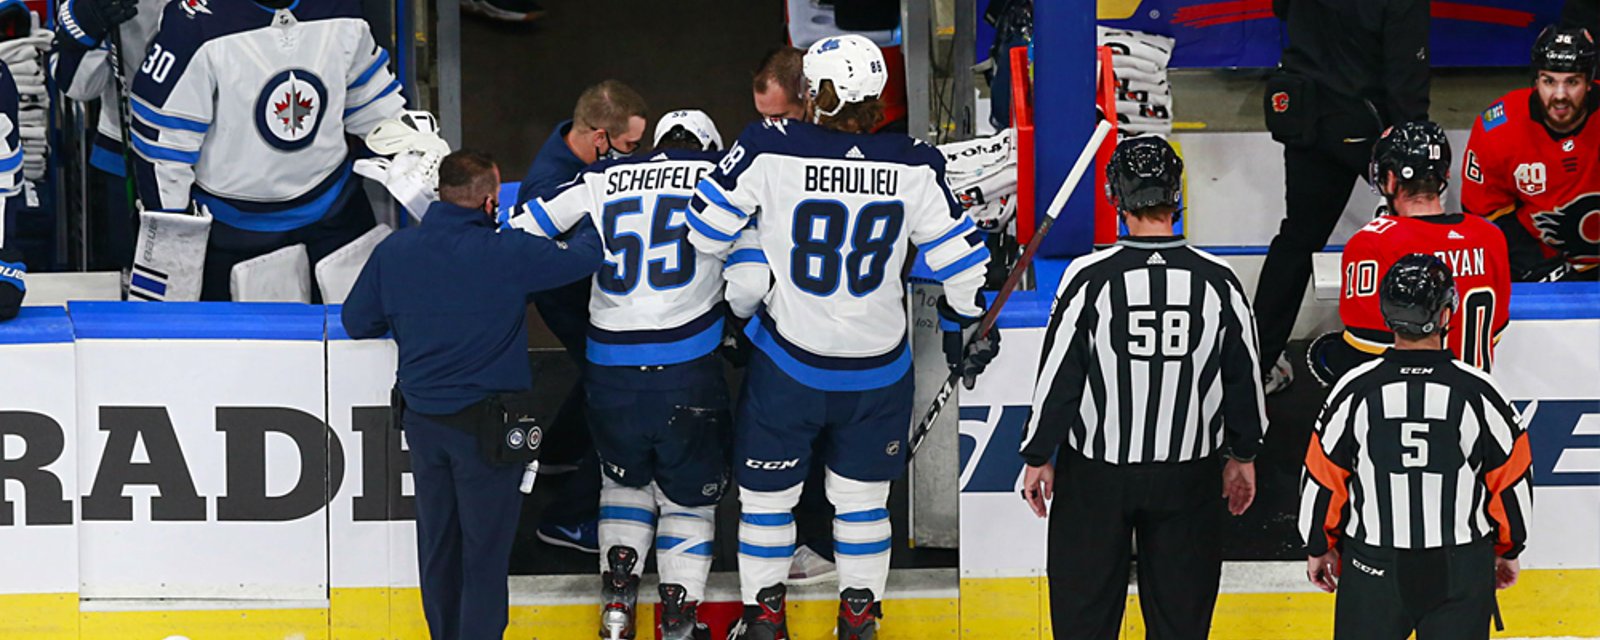 Laine and Scheifele both reveal brutal injuries after Jets eliminated by Flames